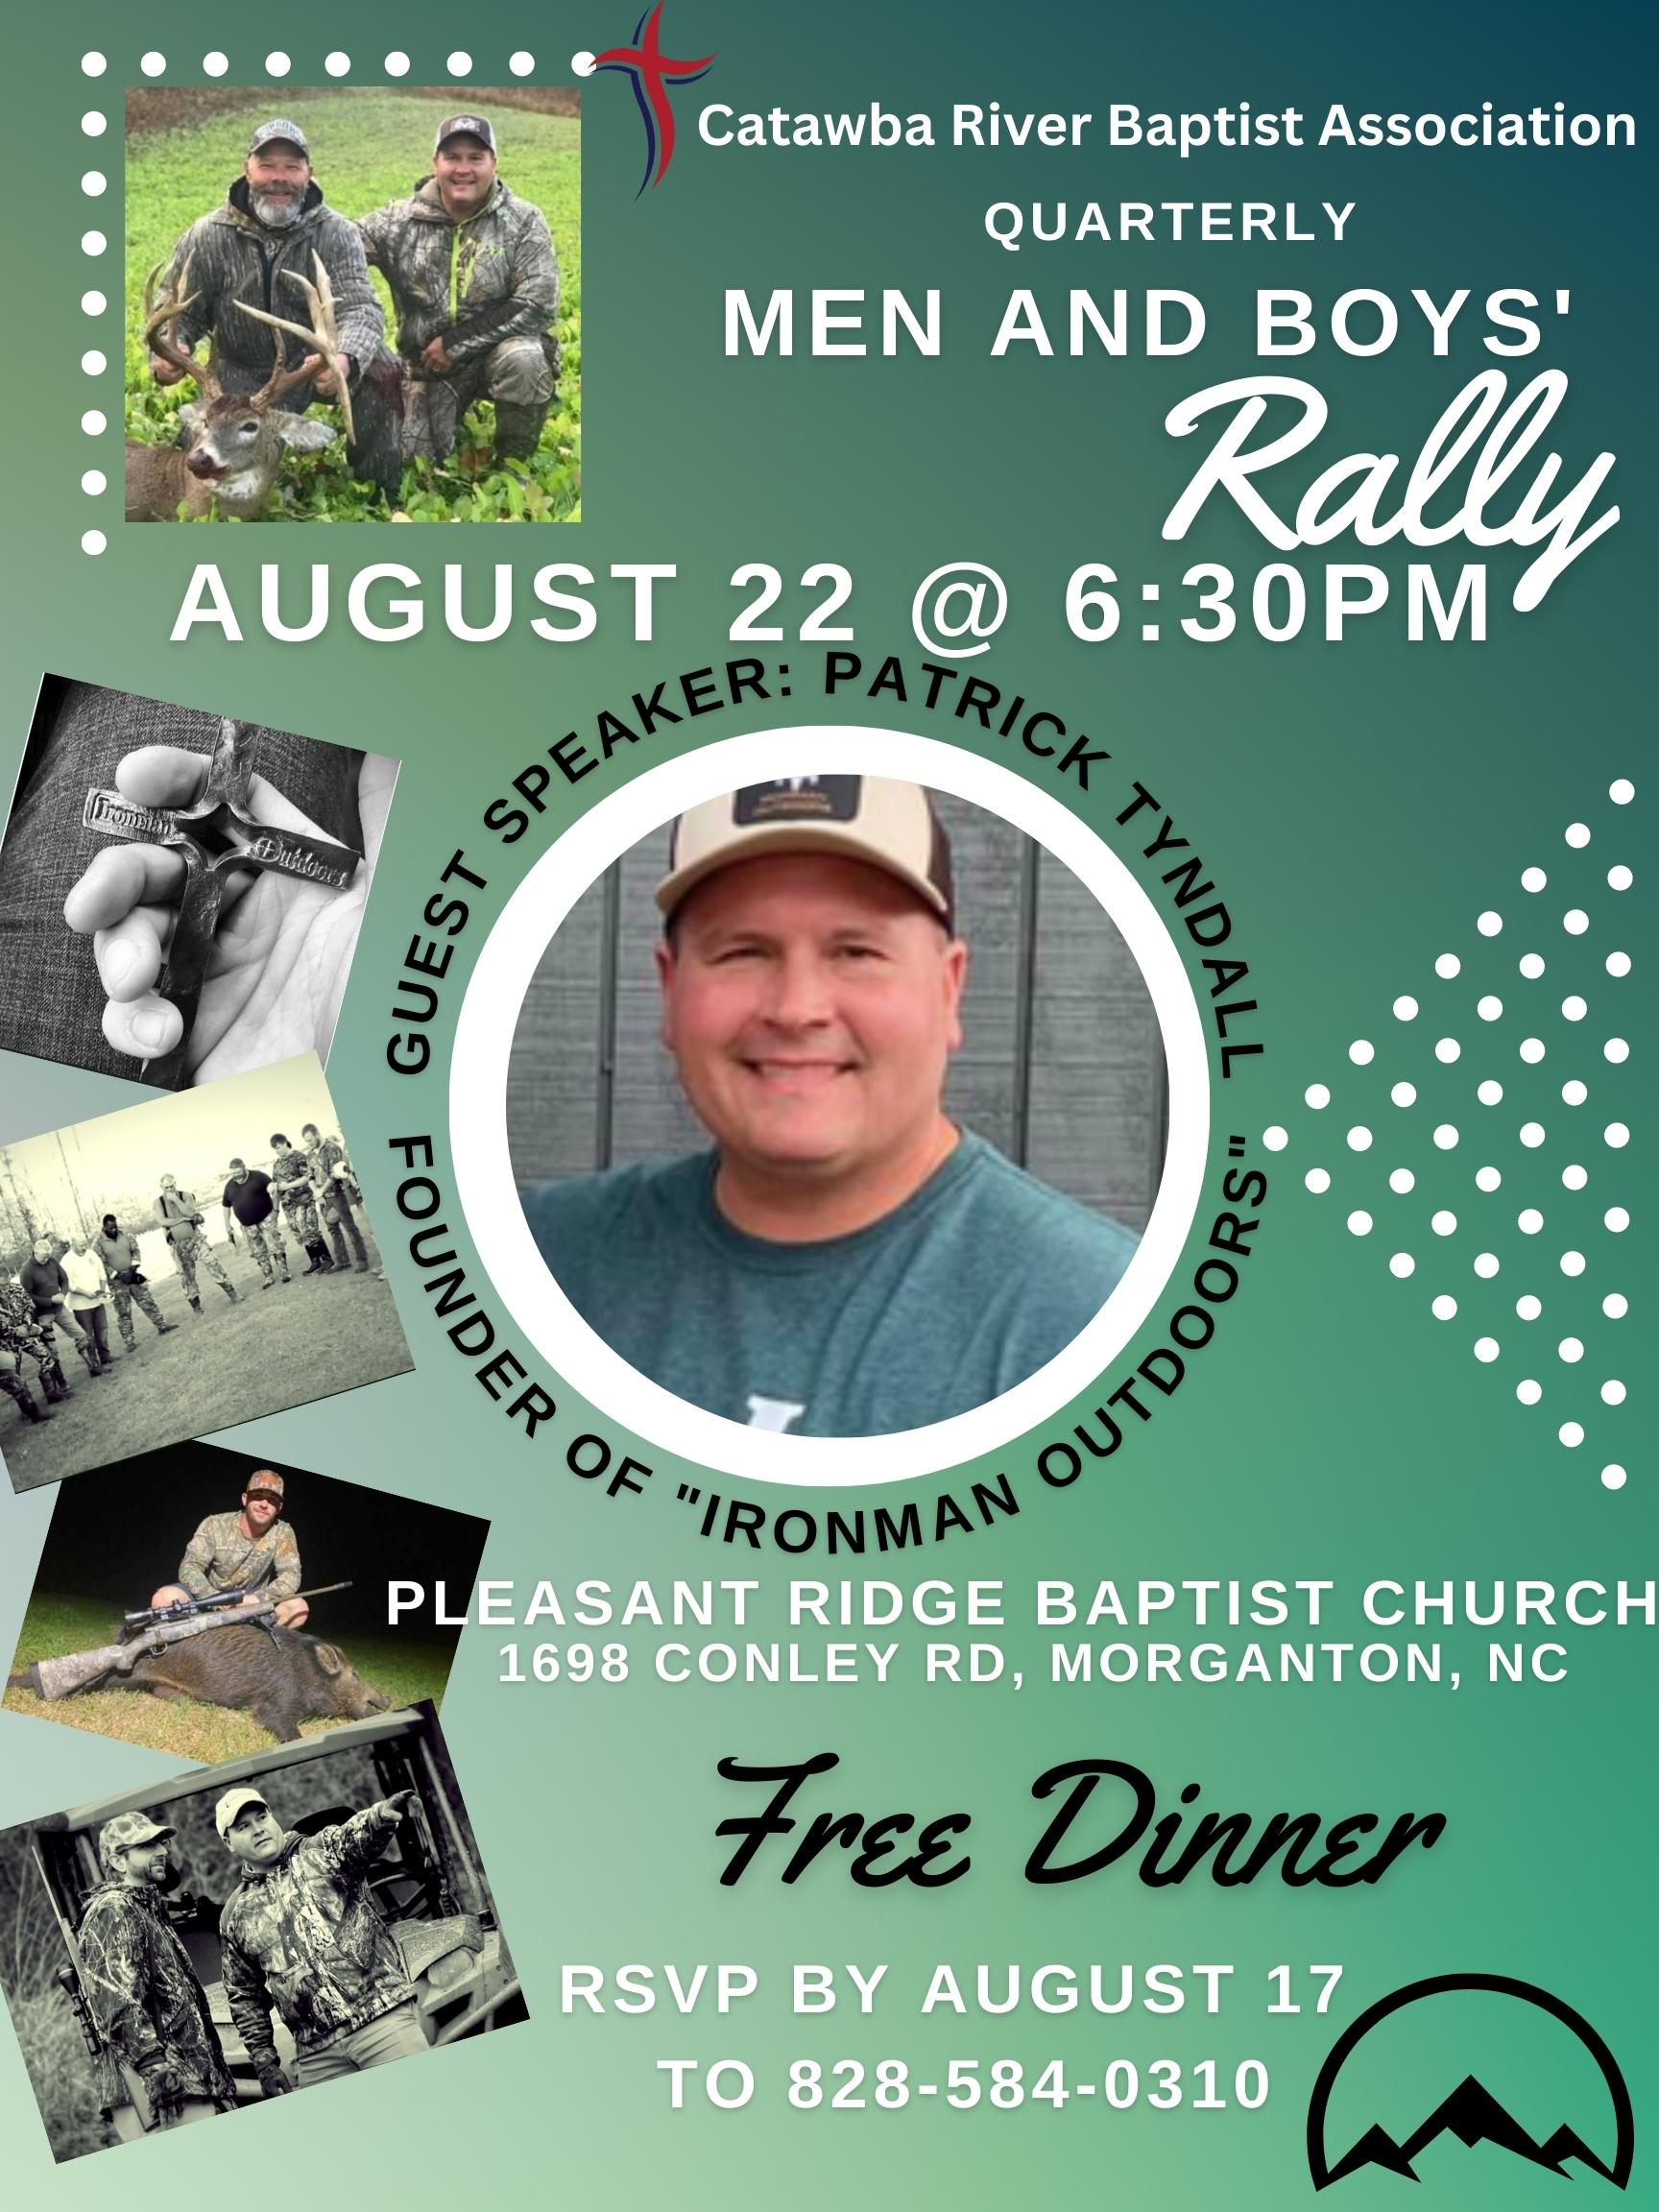 Men and Boy's Rally August 22